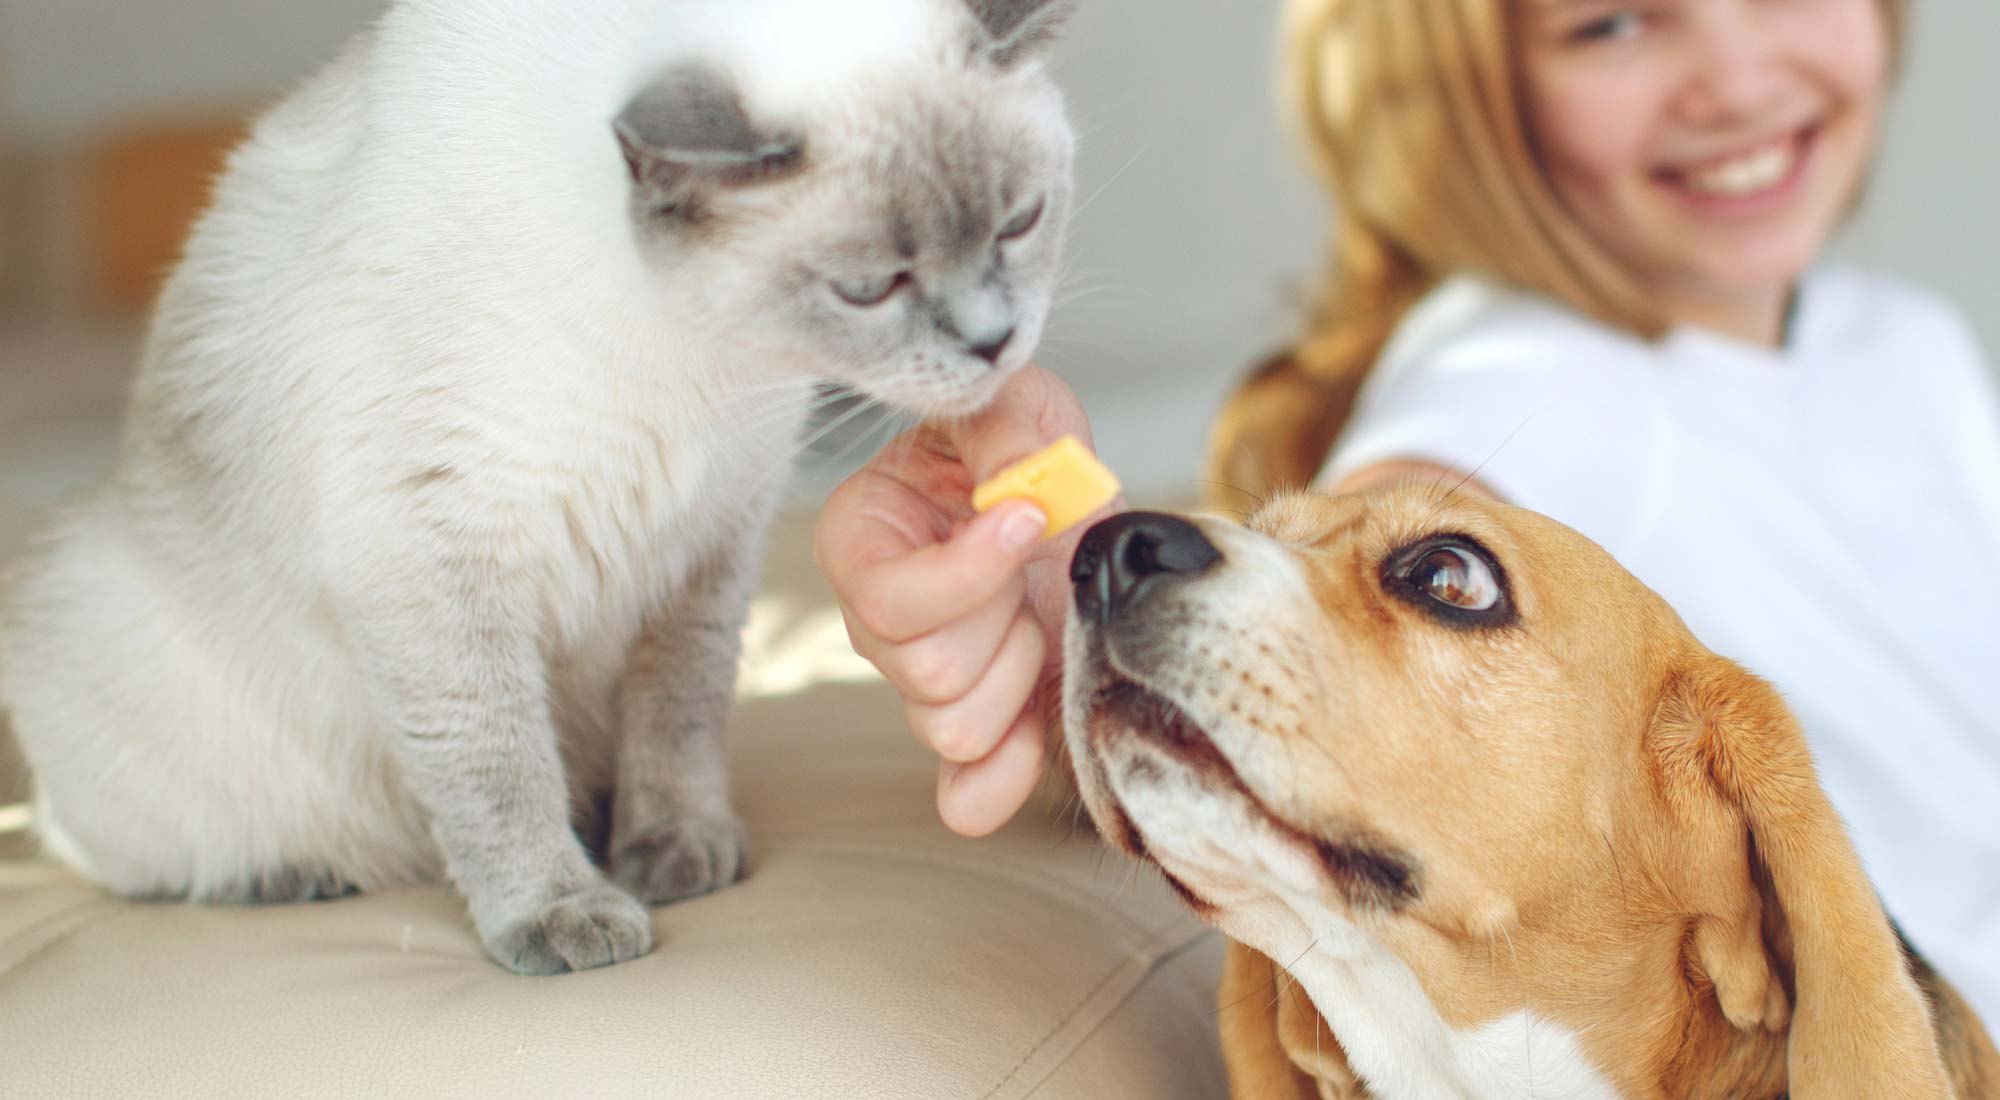 Girl giving treat to dog and cat